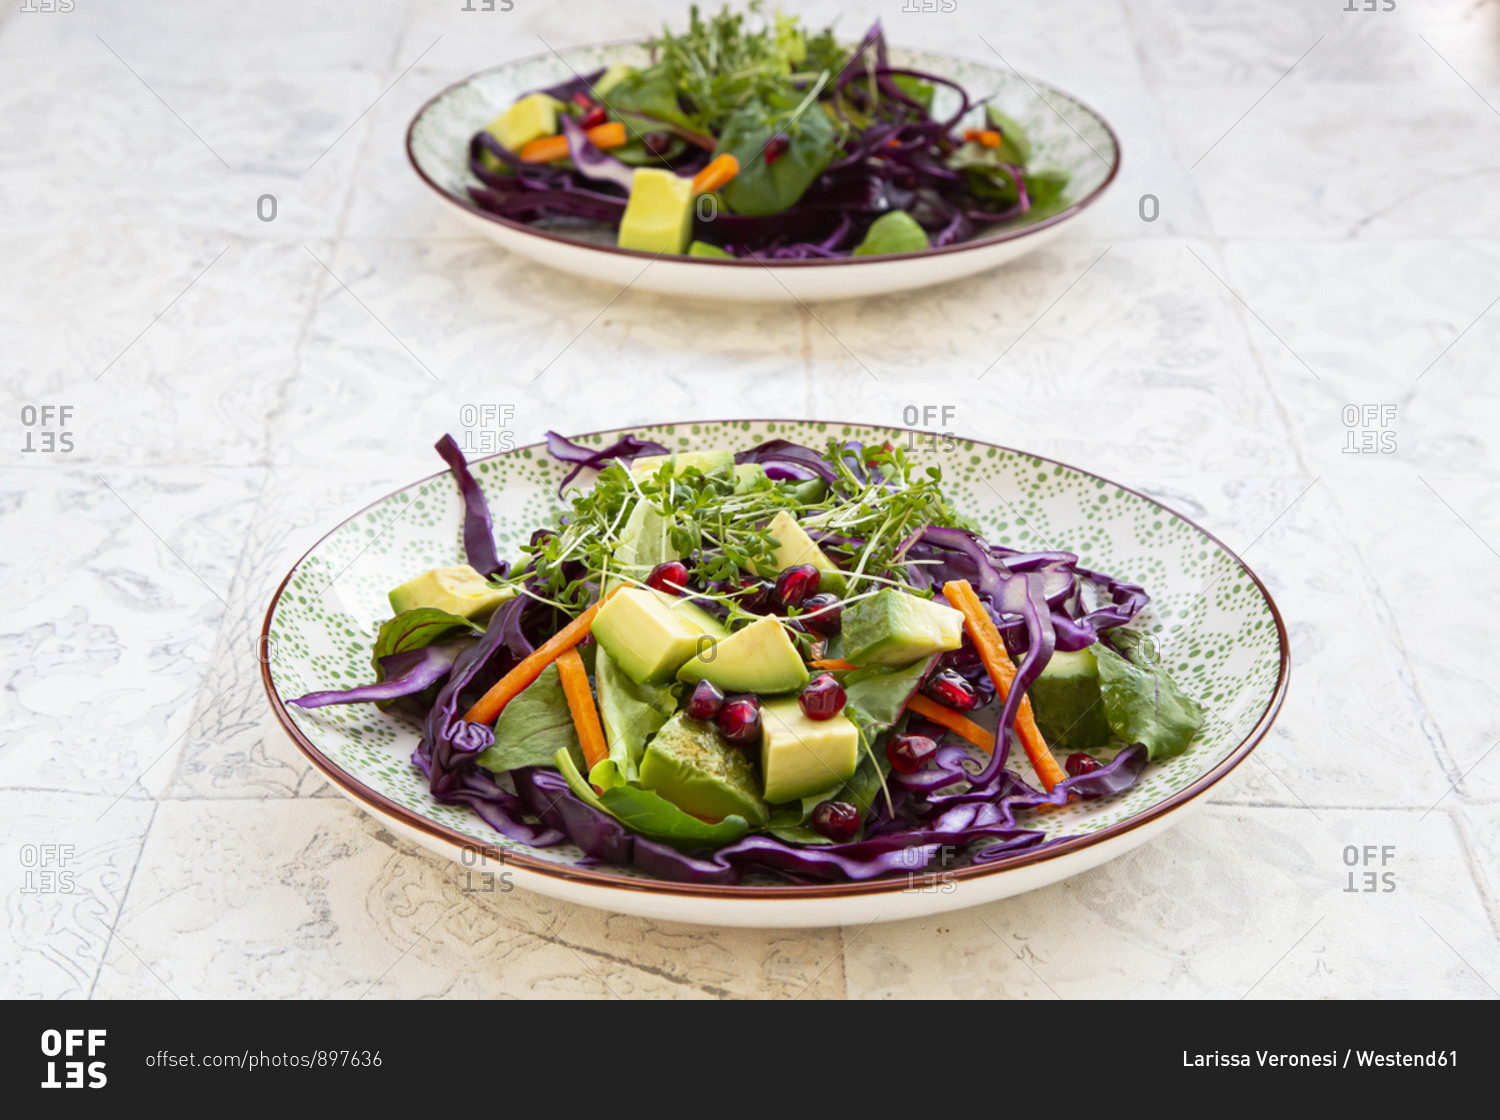 Salad with red cabbage- carrots- lettuce leaves- avocado- pomegranate seeds and cress